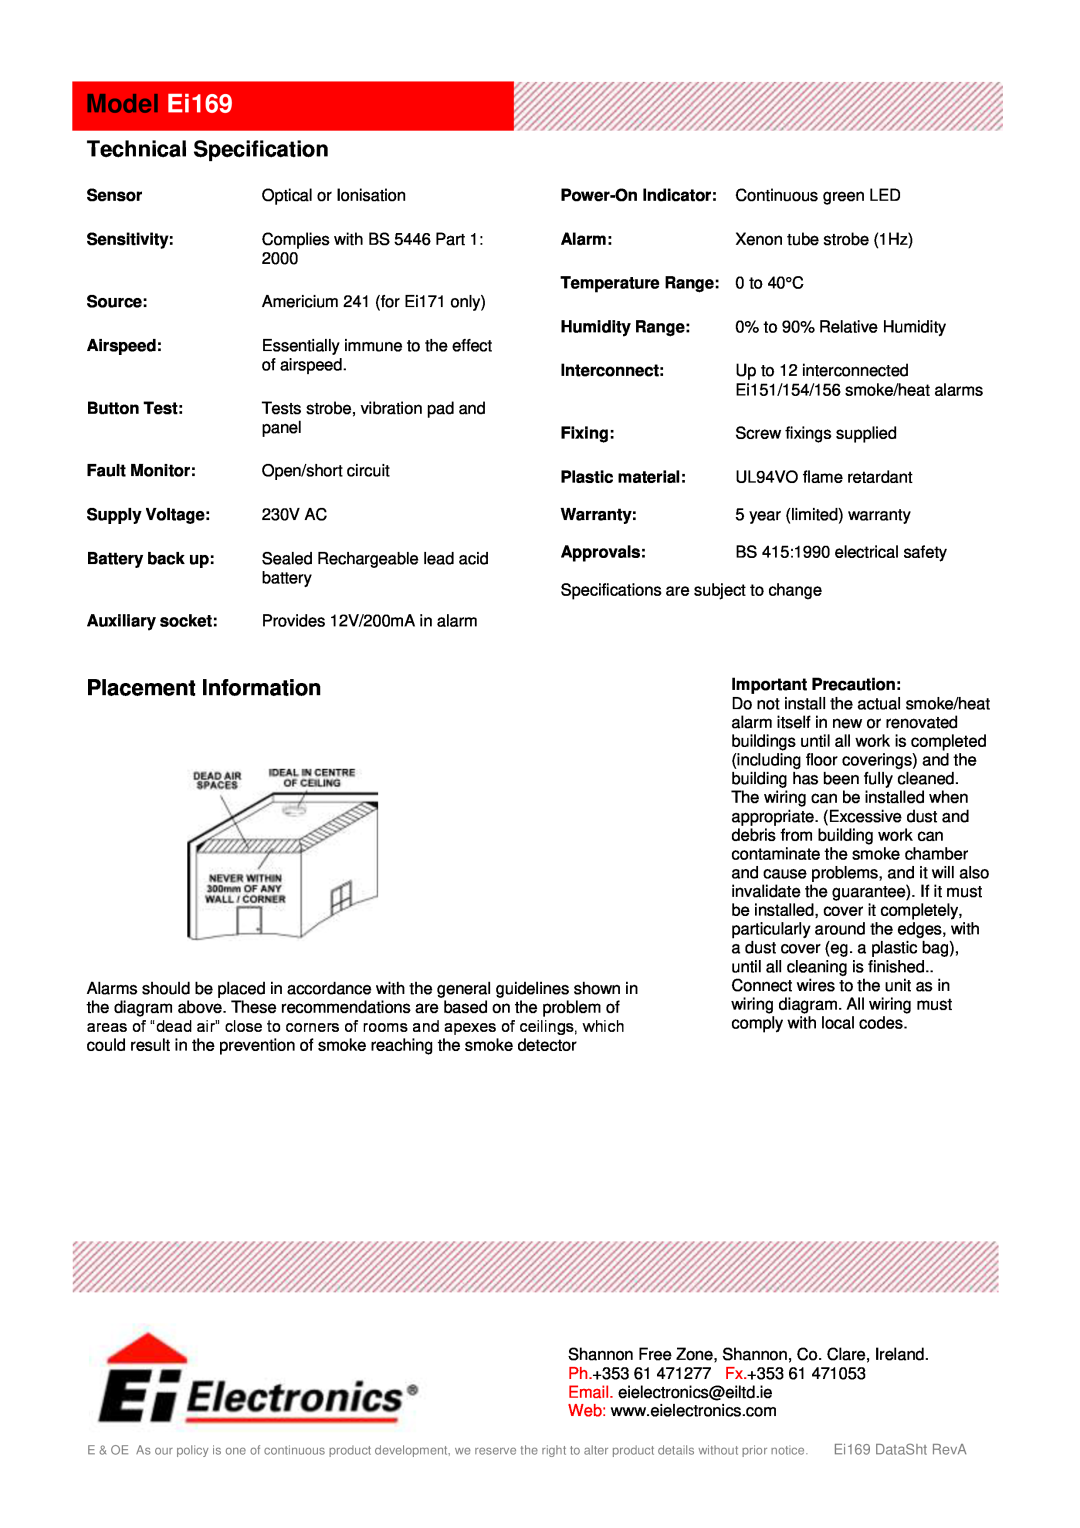 Ei Electronics manual Model Ei169, Technical Specification, Placement Information 